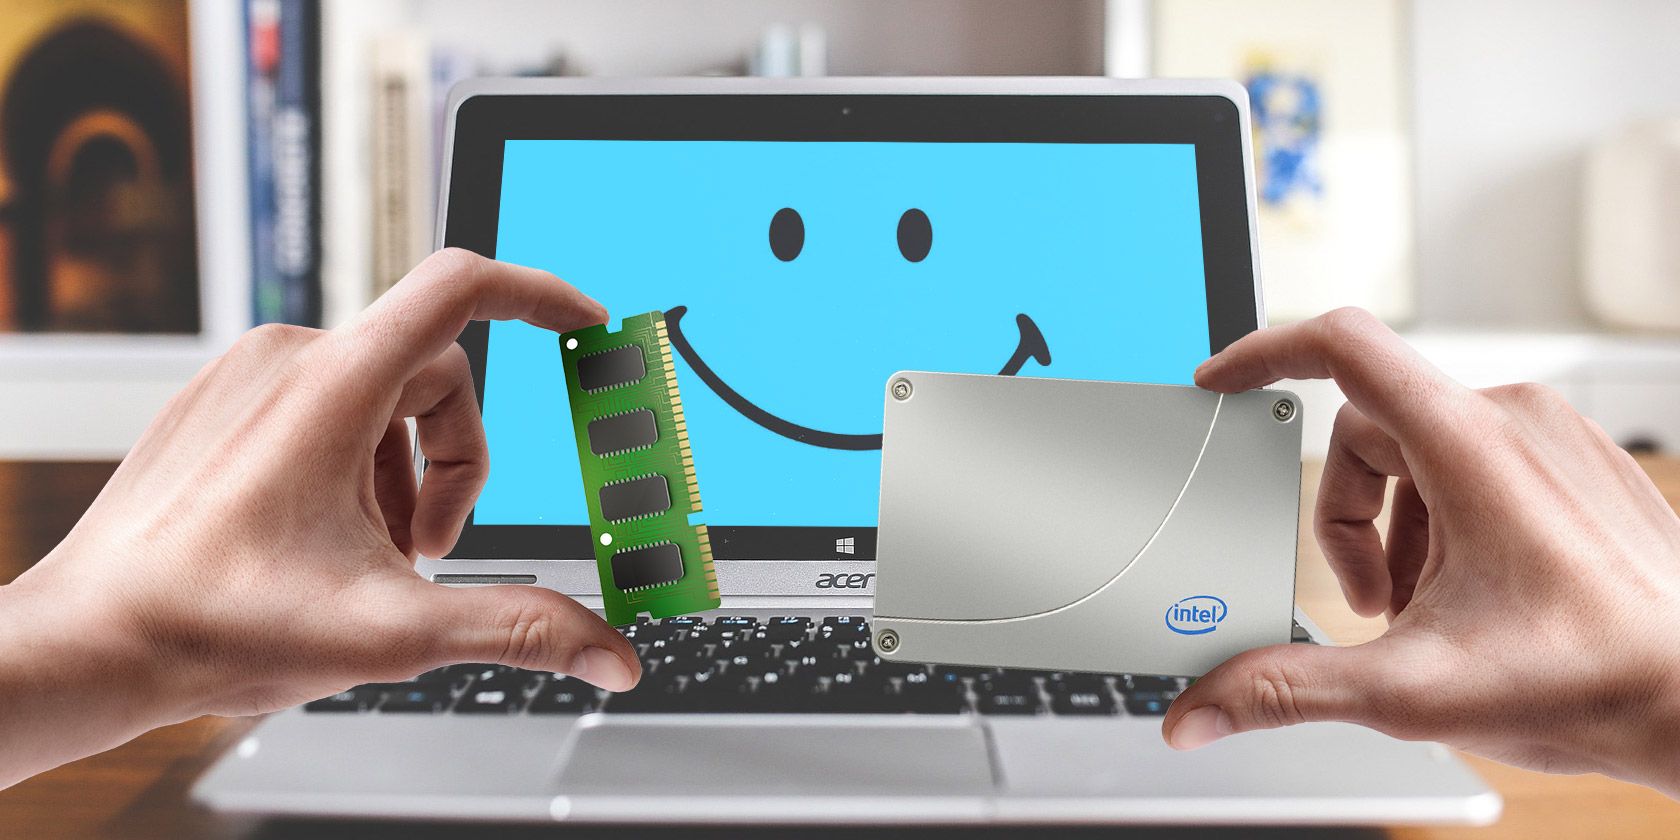 Hands holding a RAM stick and a hard drive in front of a laptop with a smiley face on the screen